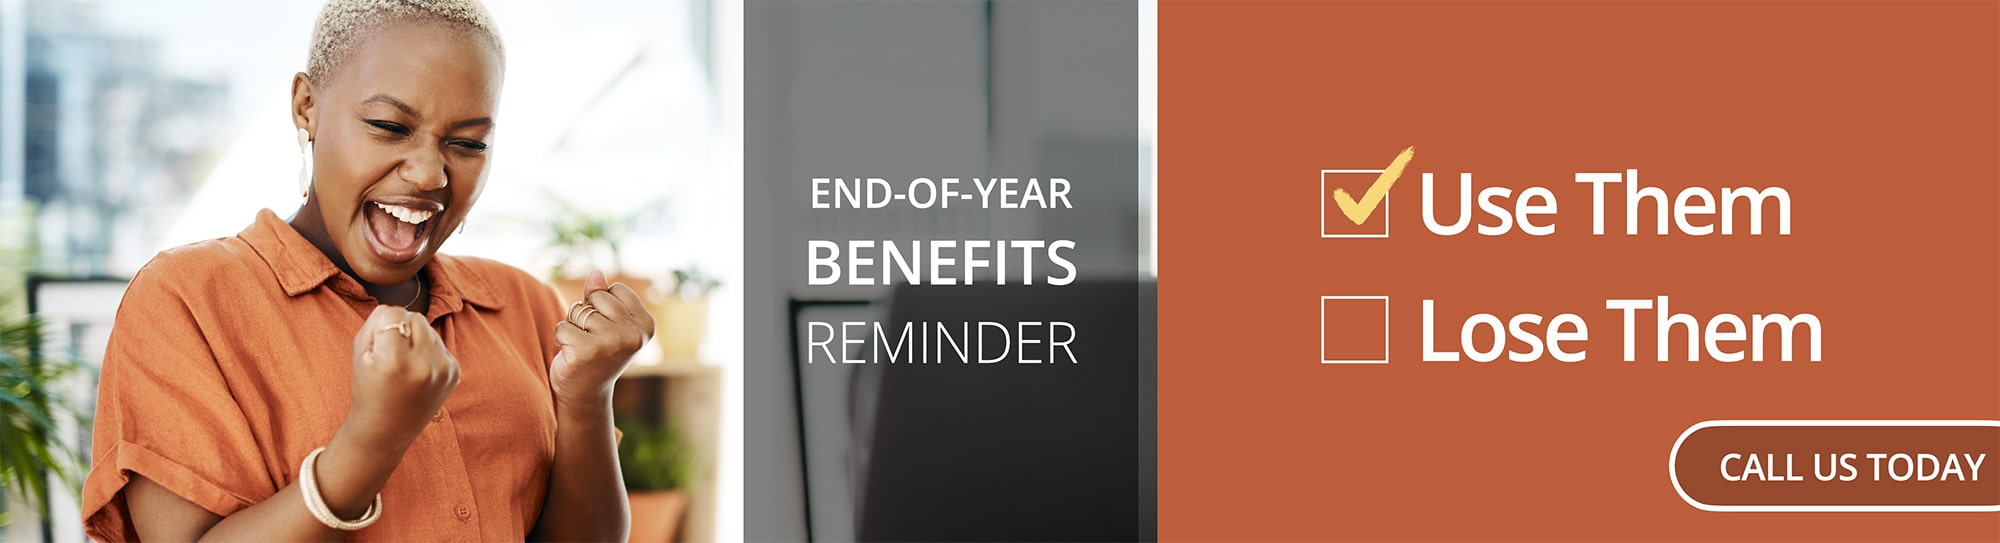 use your end of year benefits - learn more